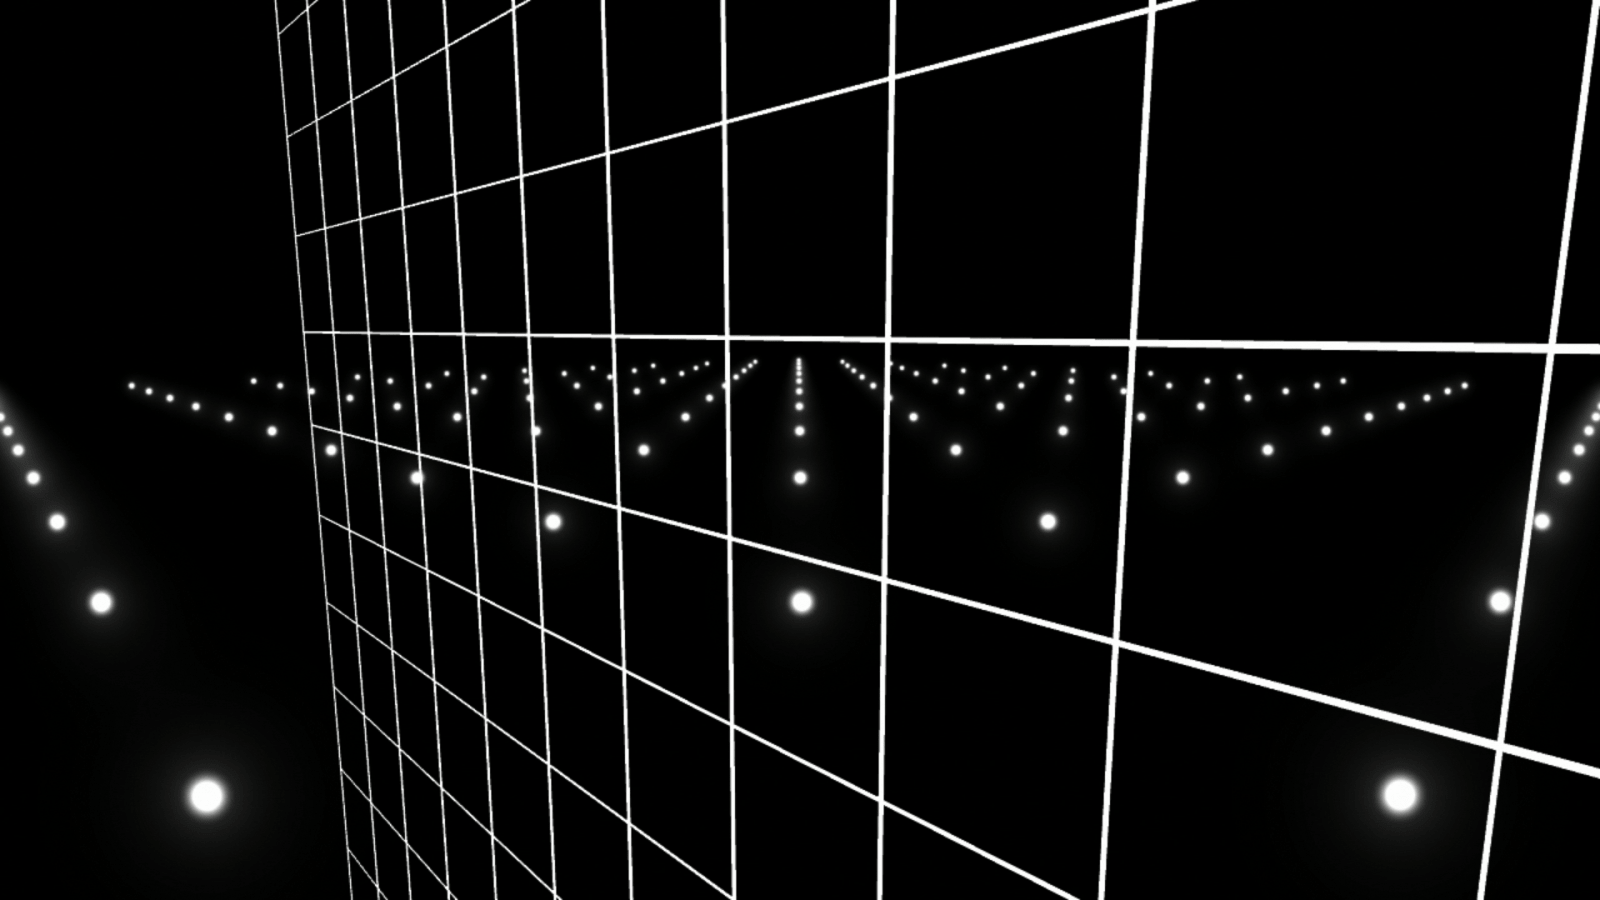 An angled white grid in front of ranks and files of small glowing white spheres, all floating within a black background